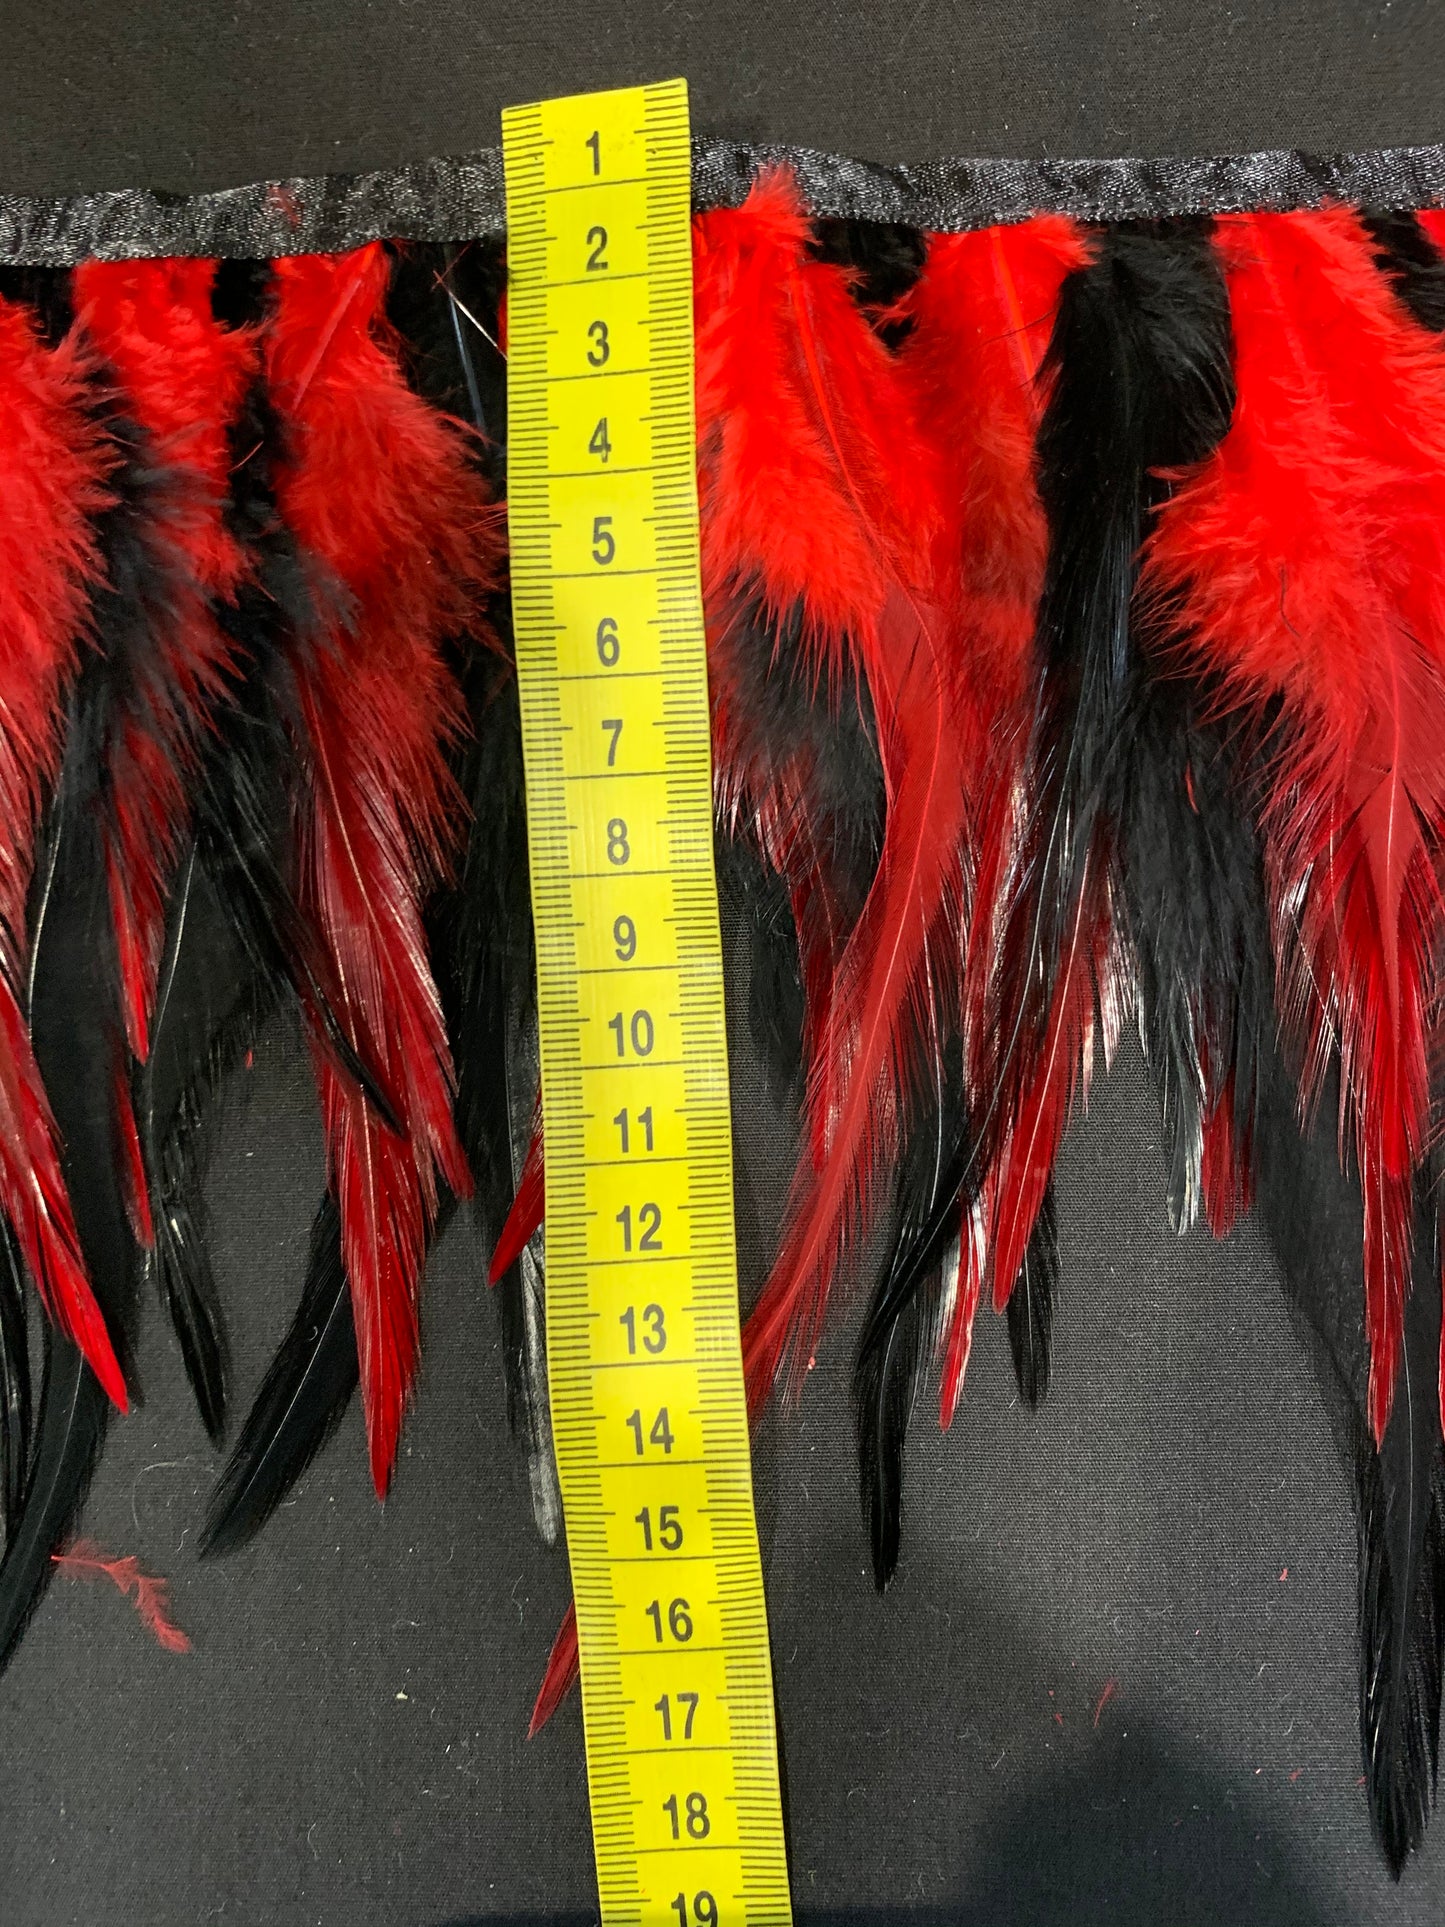 Red & Black Mixed Feathers